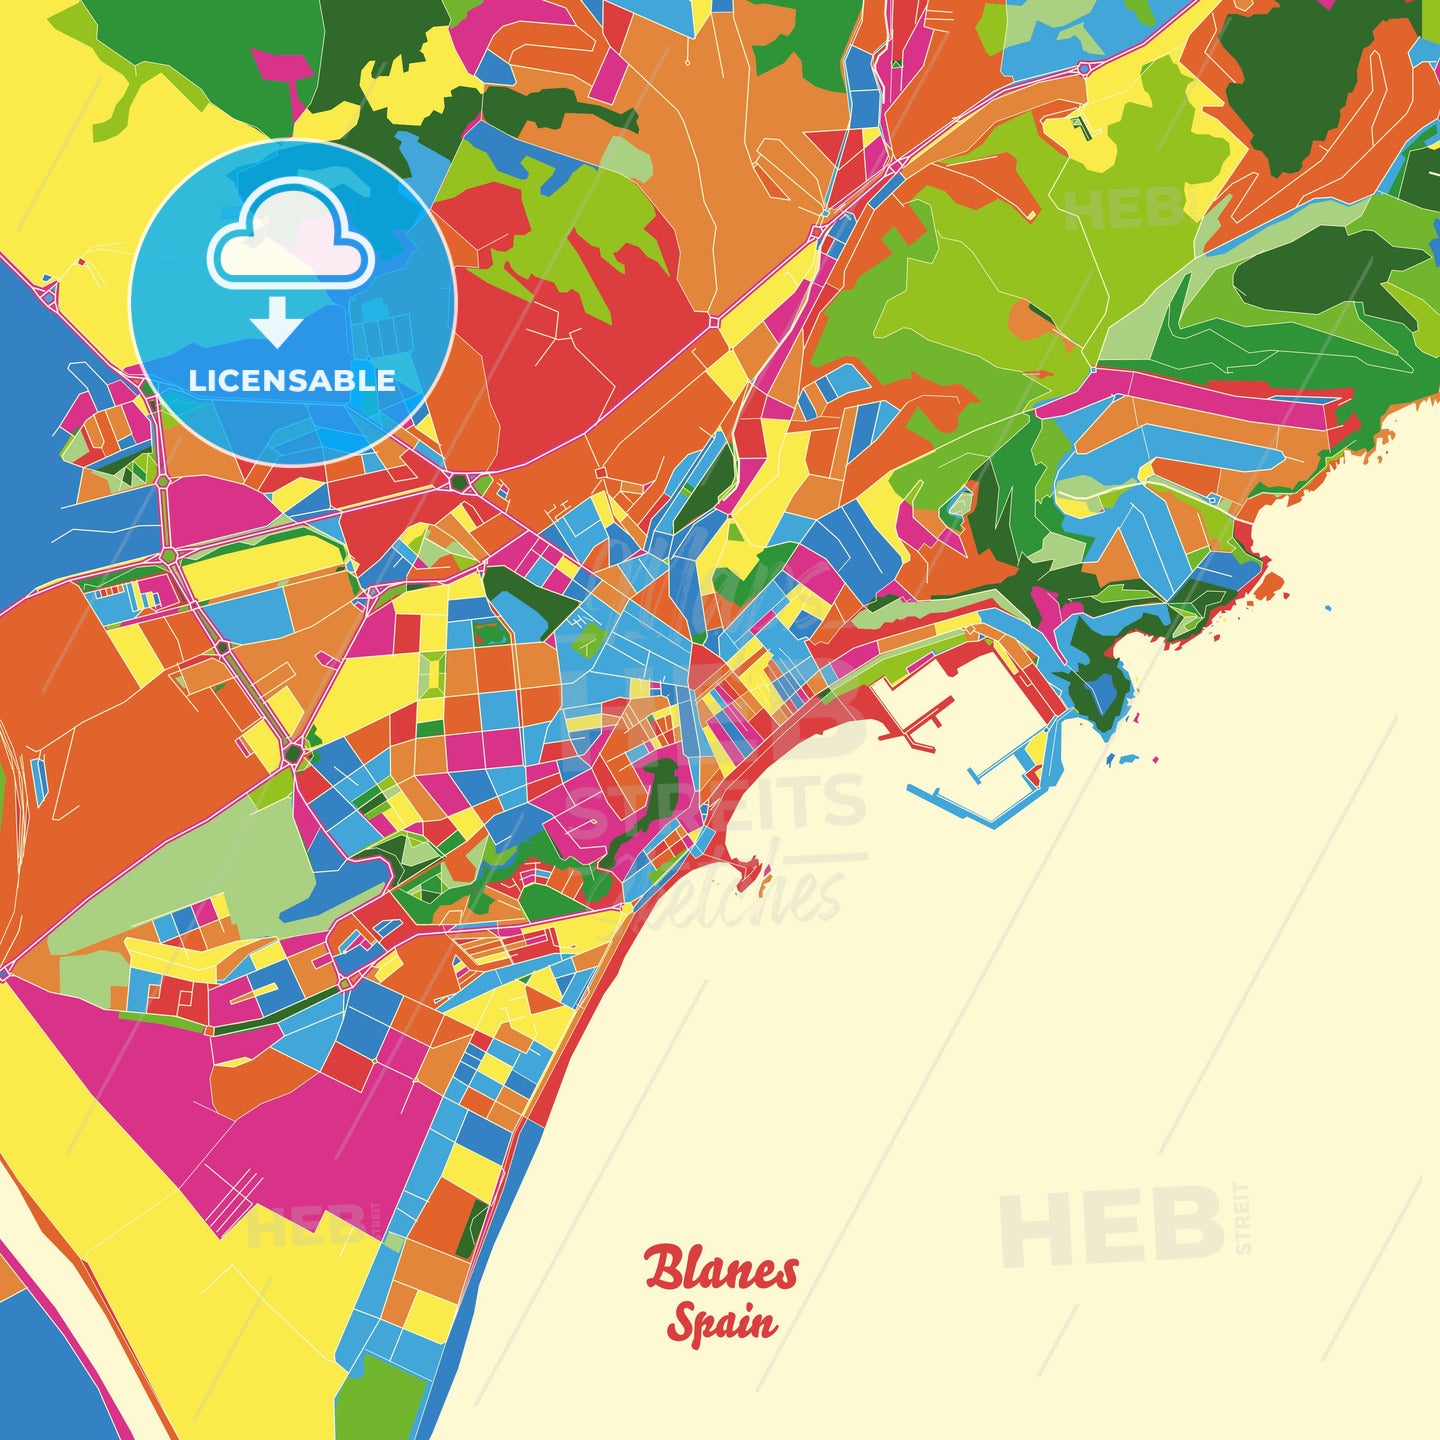 Blanes, Spain Crazy Colorful Street Map Poster Template - HEBSTREITS Sketches